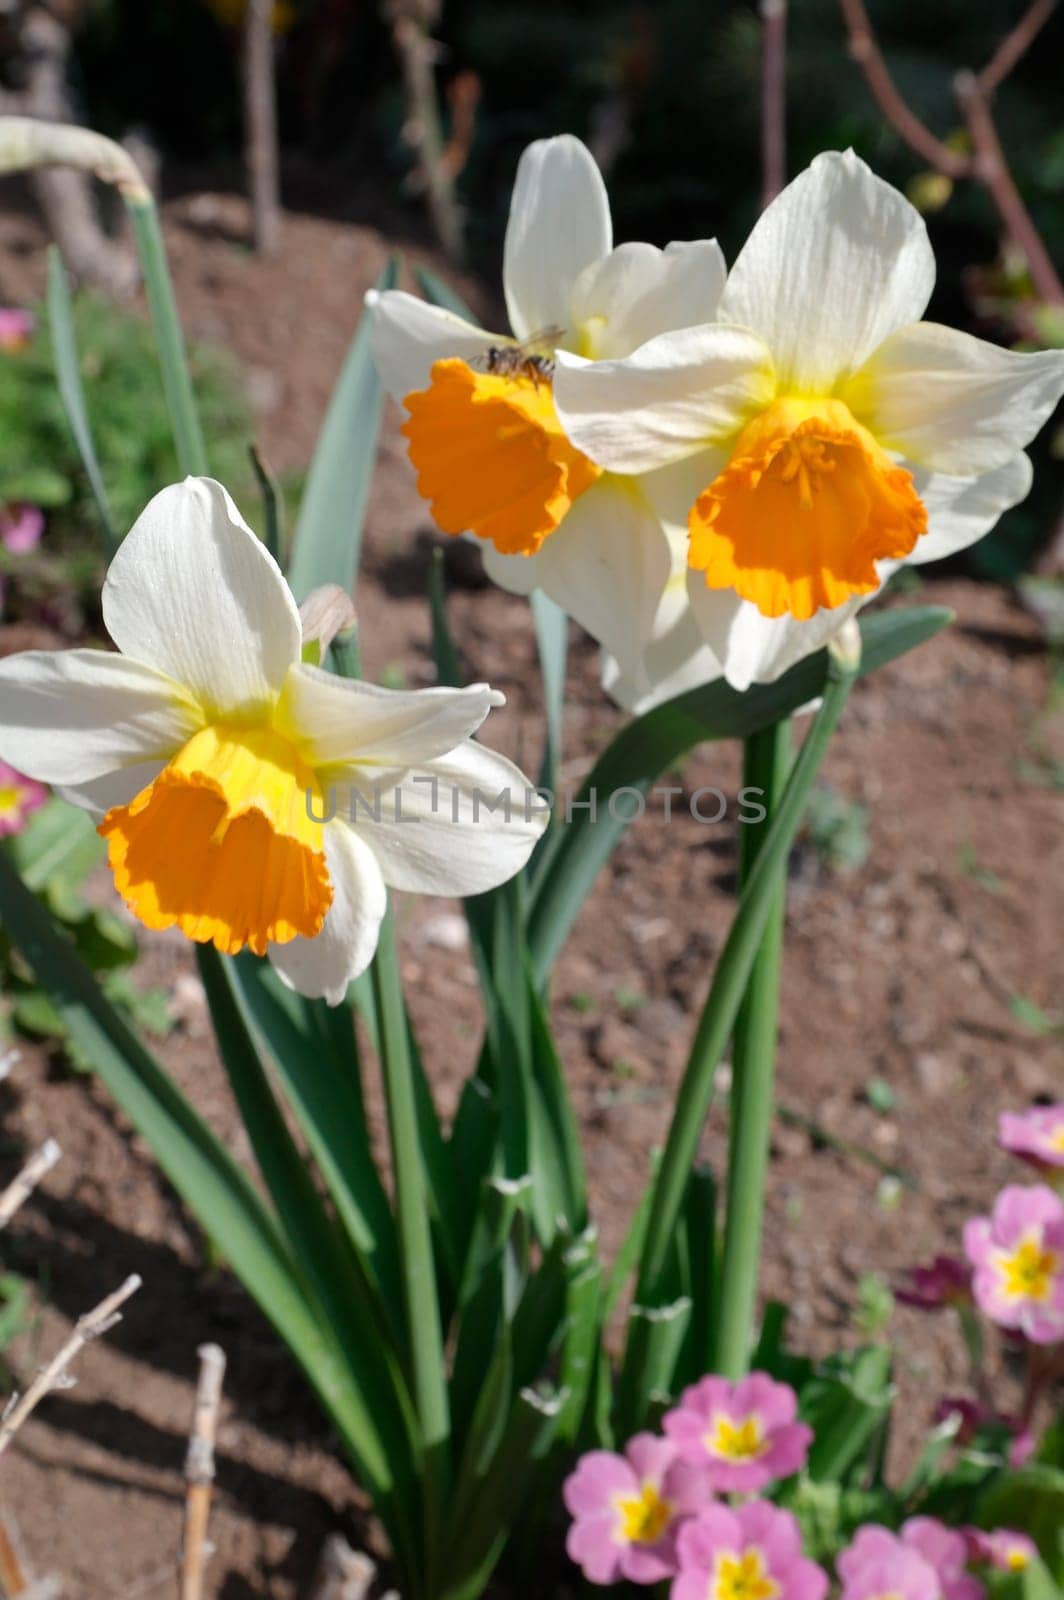 In spring, narcissus (daffodils) bloom in a flower bed.